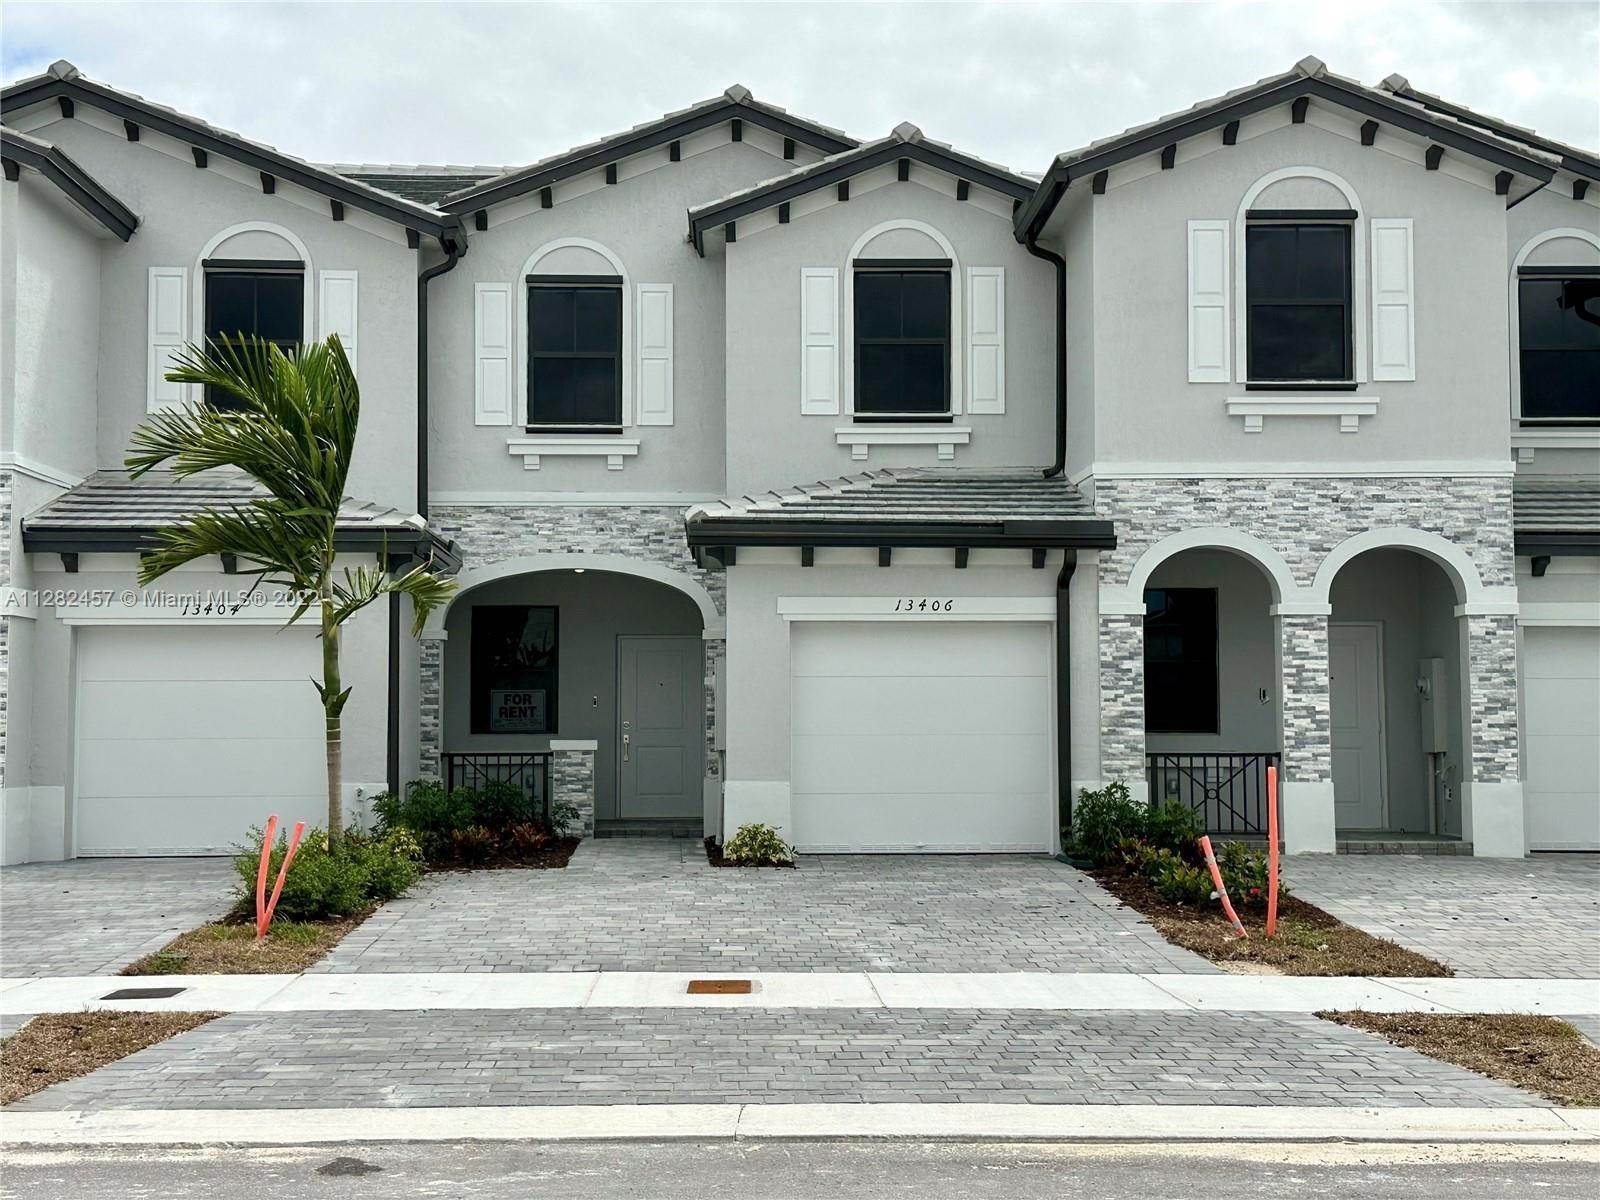 Townhouse at Homestead, FL 33132